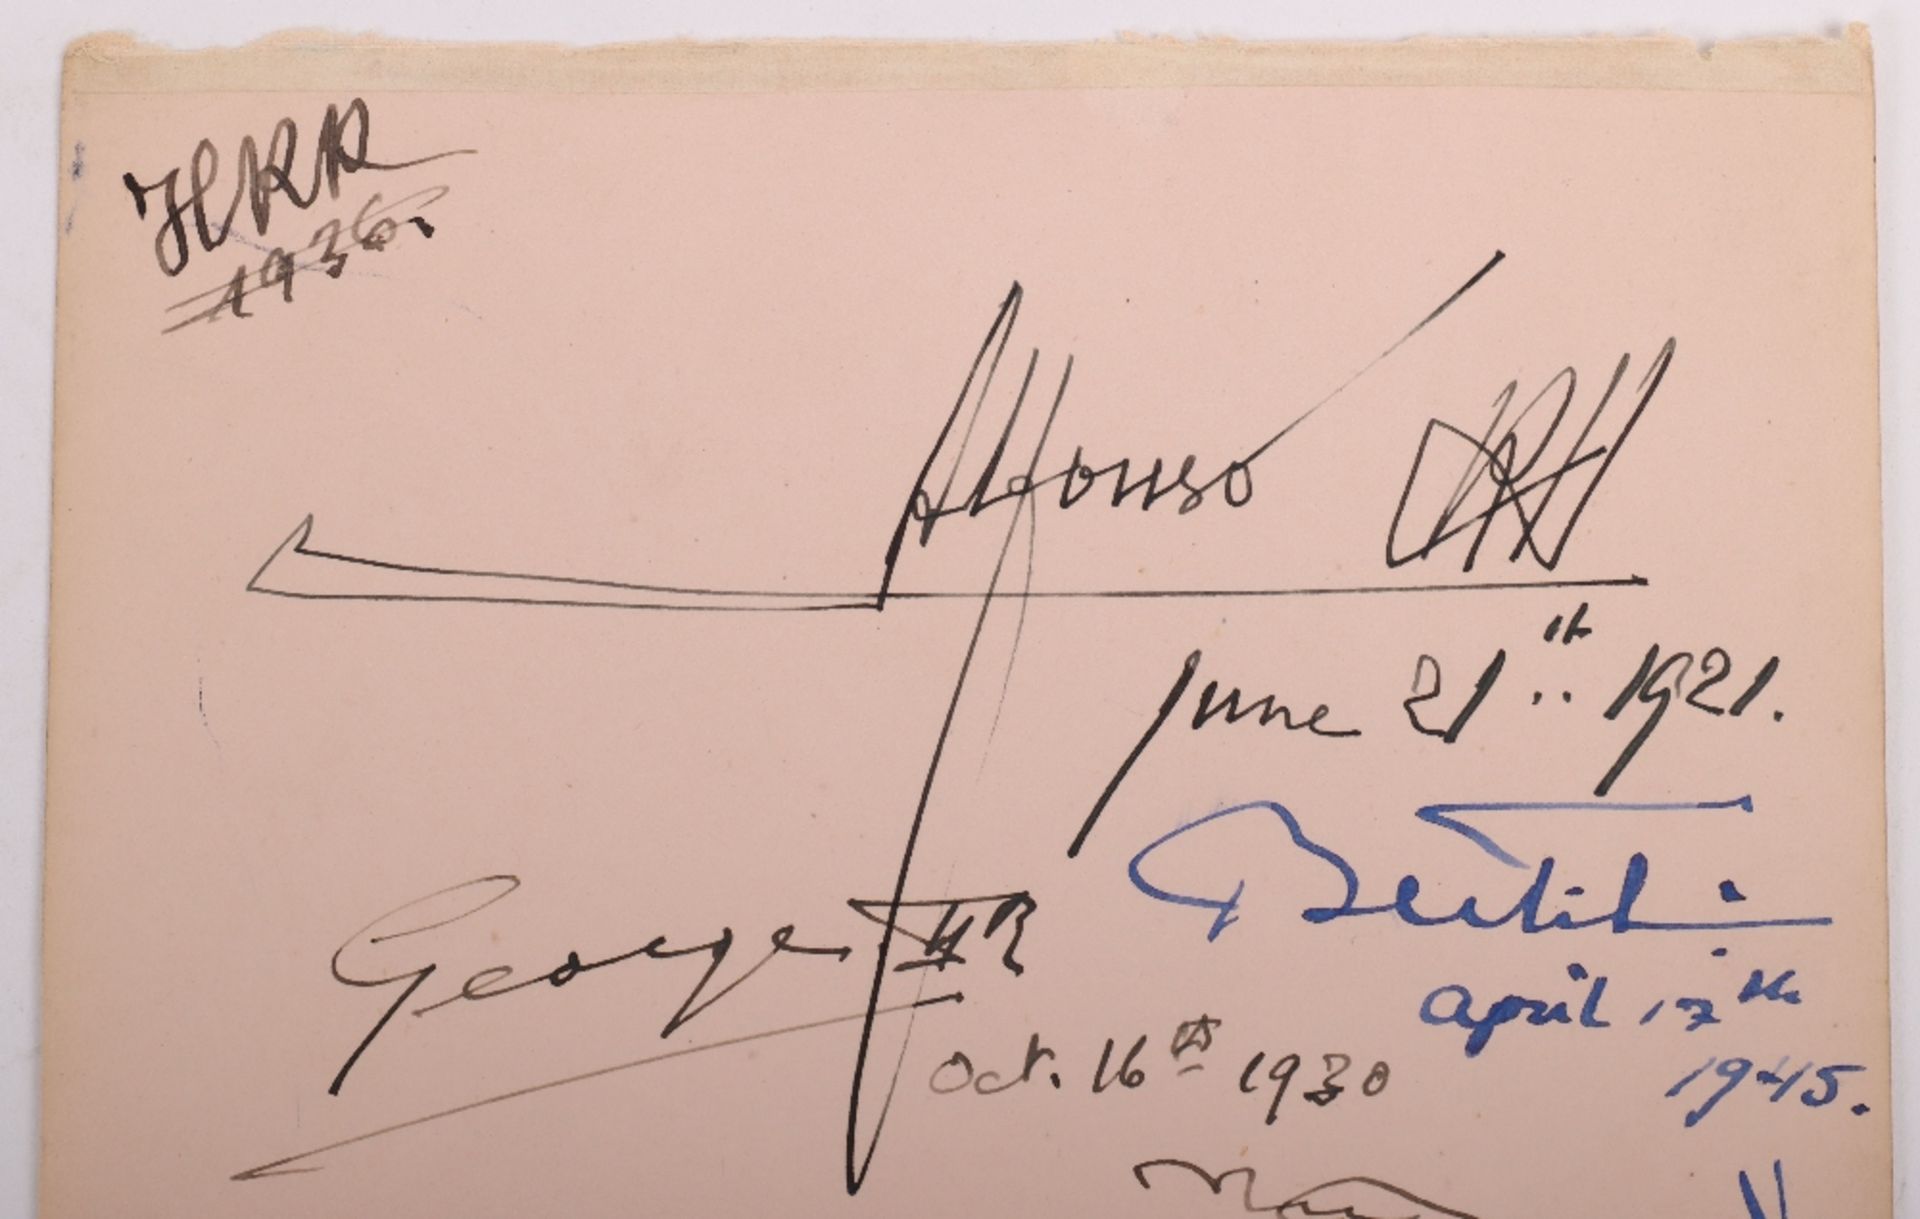 Rare Autograph Page Signed by Many Notorious World Leaders of the 20th Century - Image 2 of 5